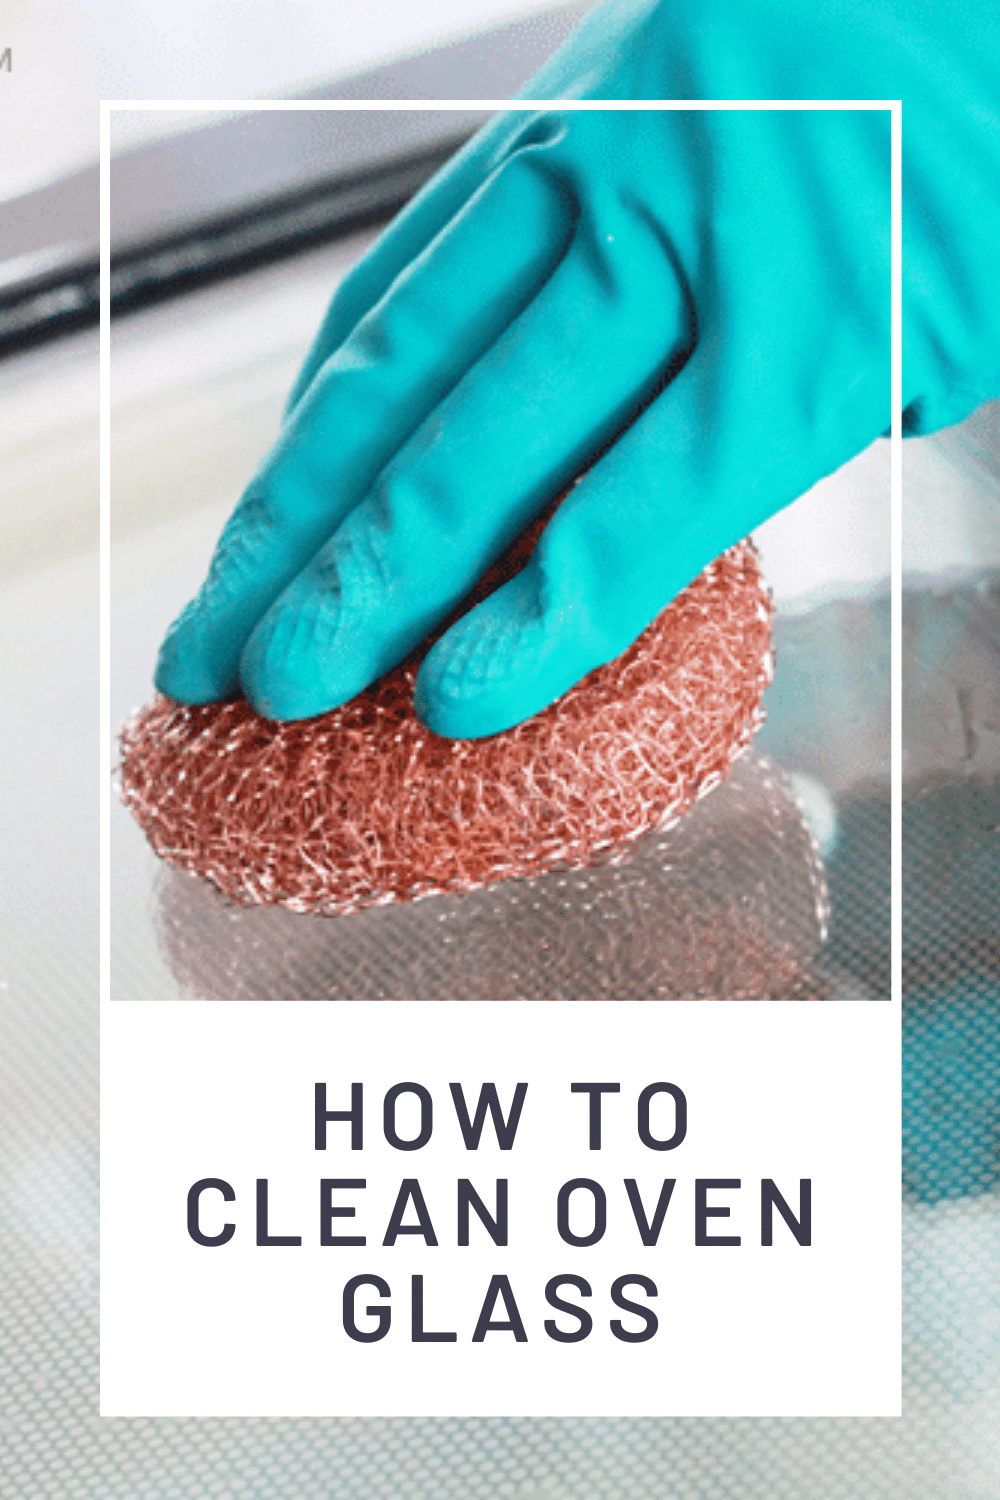 Cleaning the oven is no fun, but it's even less fun when your cleaning method is ineffective. Follow our step-by-step guide to clean your oven quickly and thoroughly, with no expensive products required. via @somewhatsimple